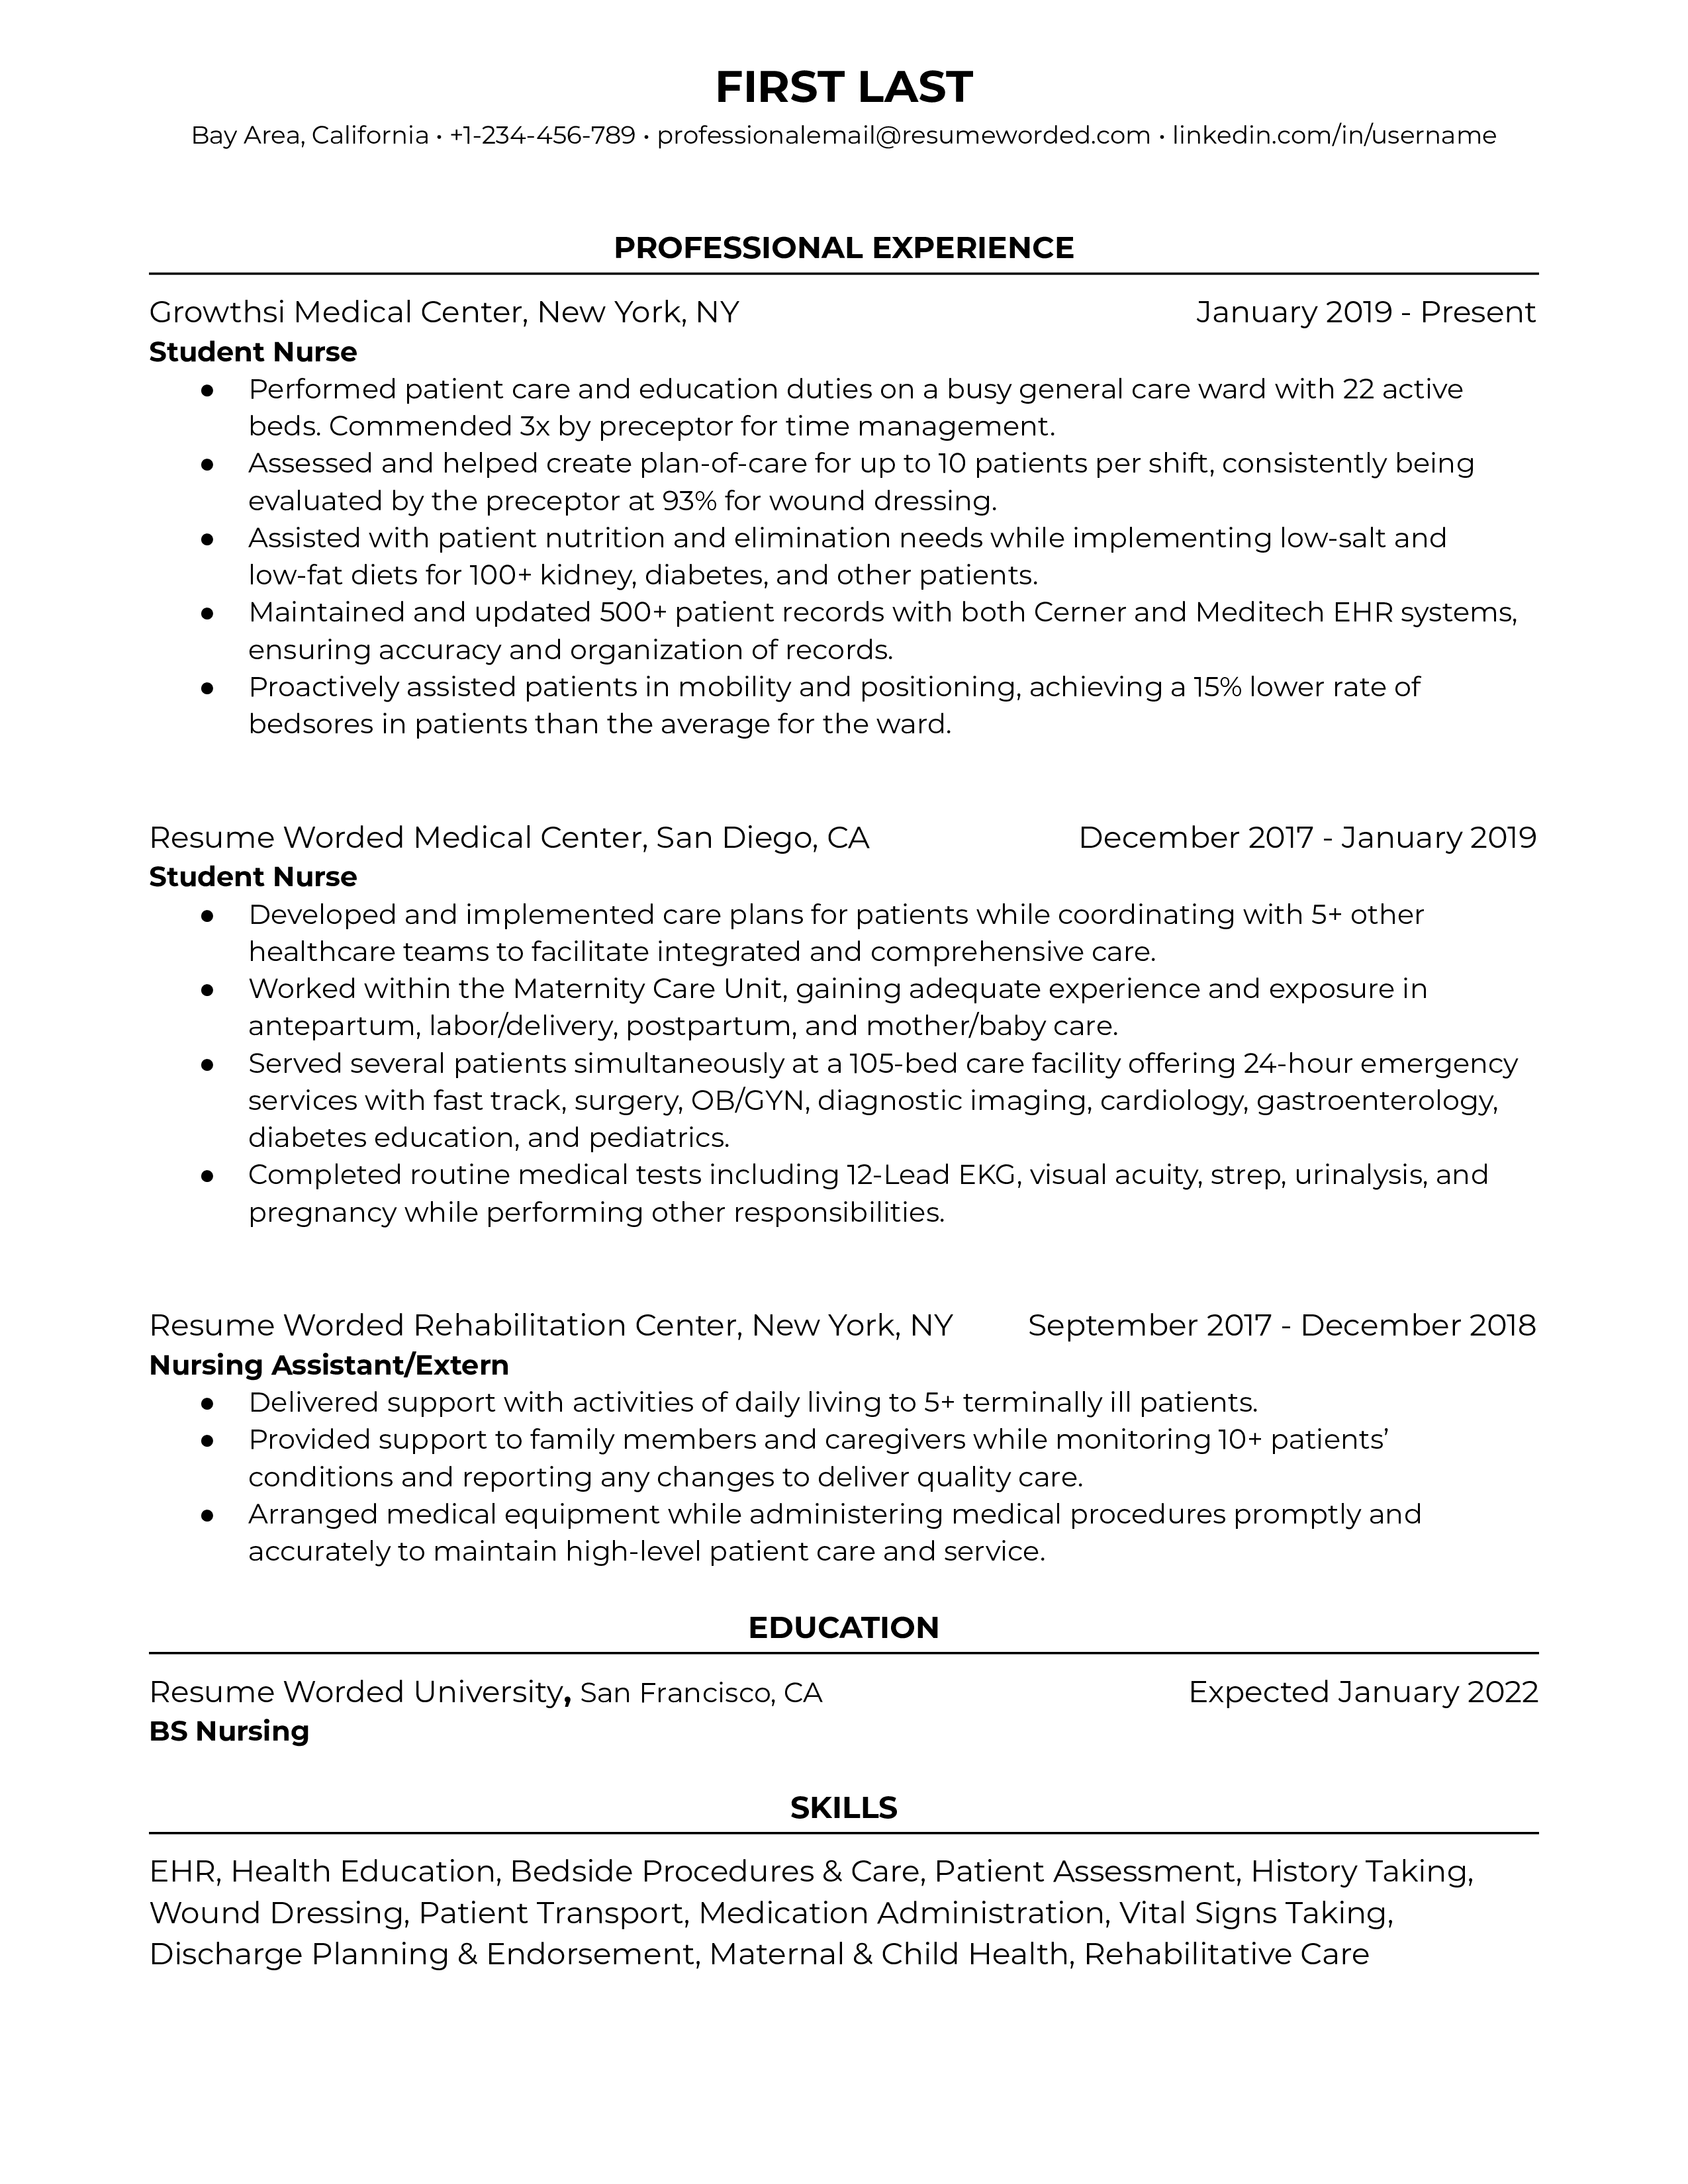 Nursing student resume template sample featuring student nursing experience and a dedicated skills section